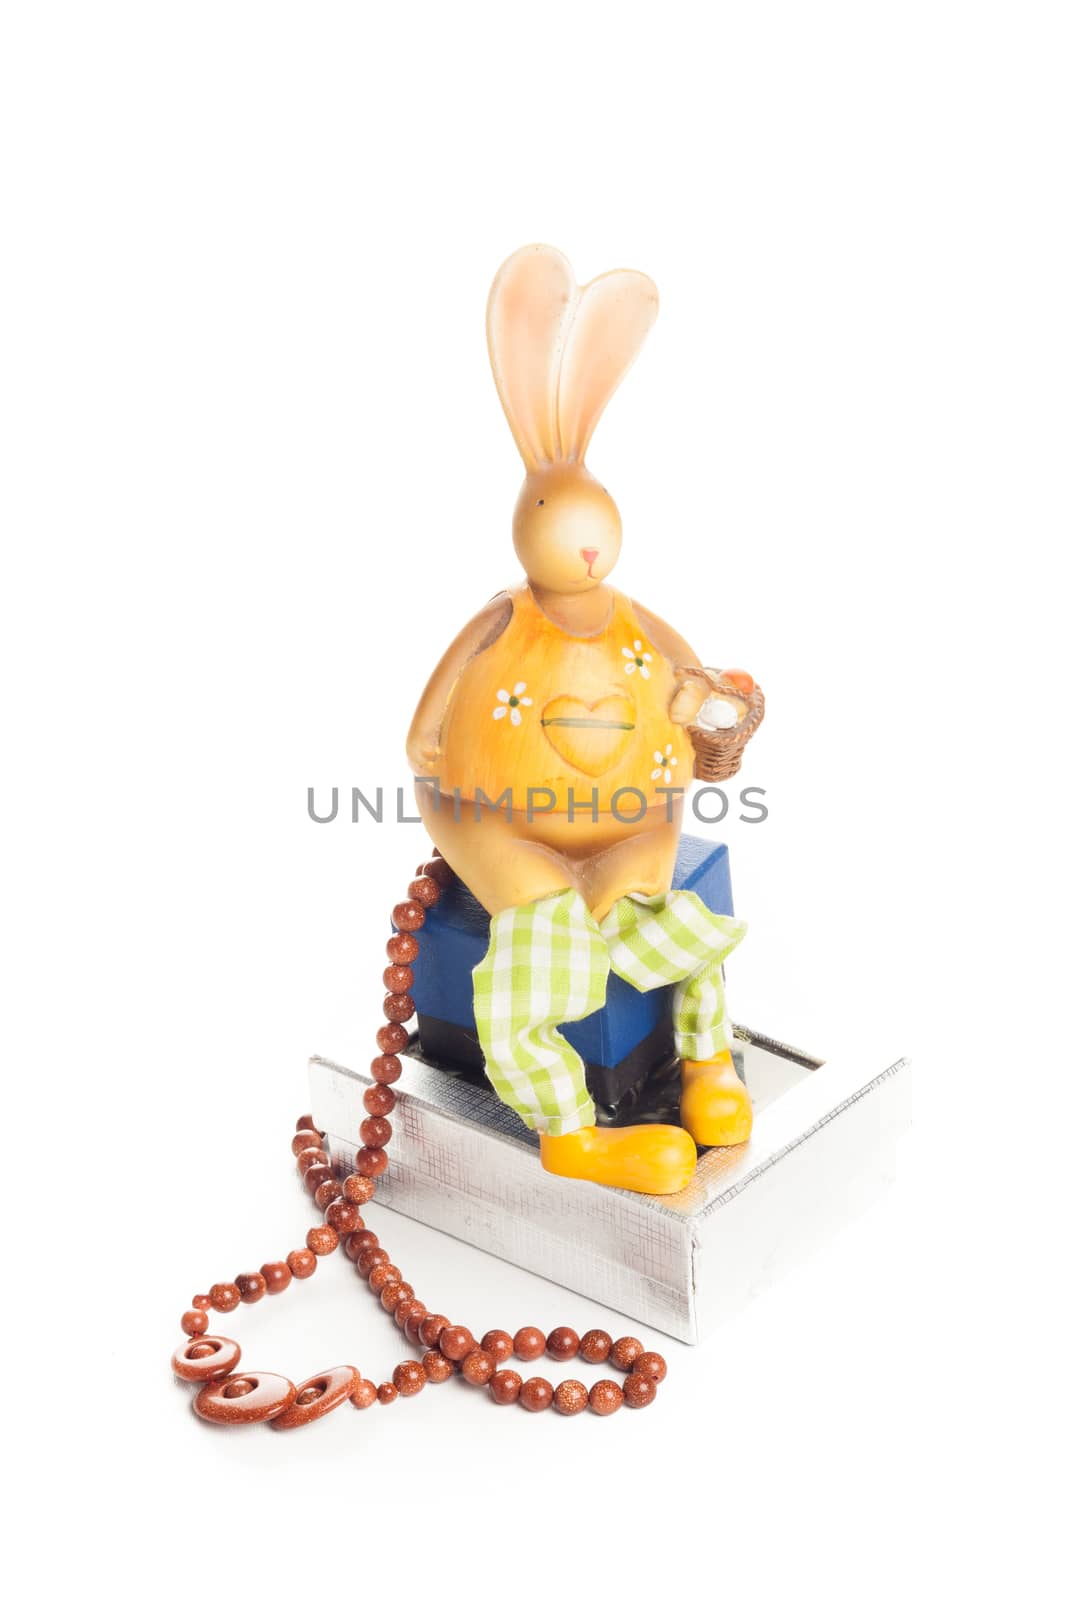 wood brown art fashion necklace on jewelry boxes with bunny